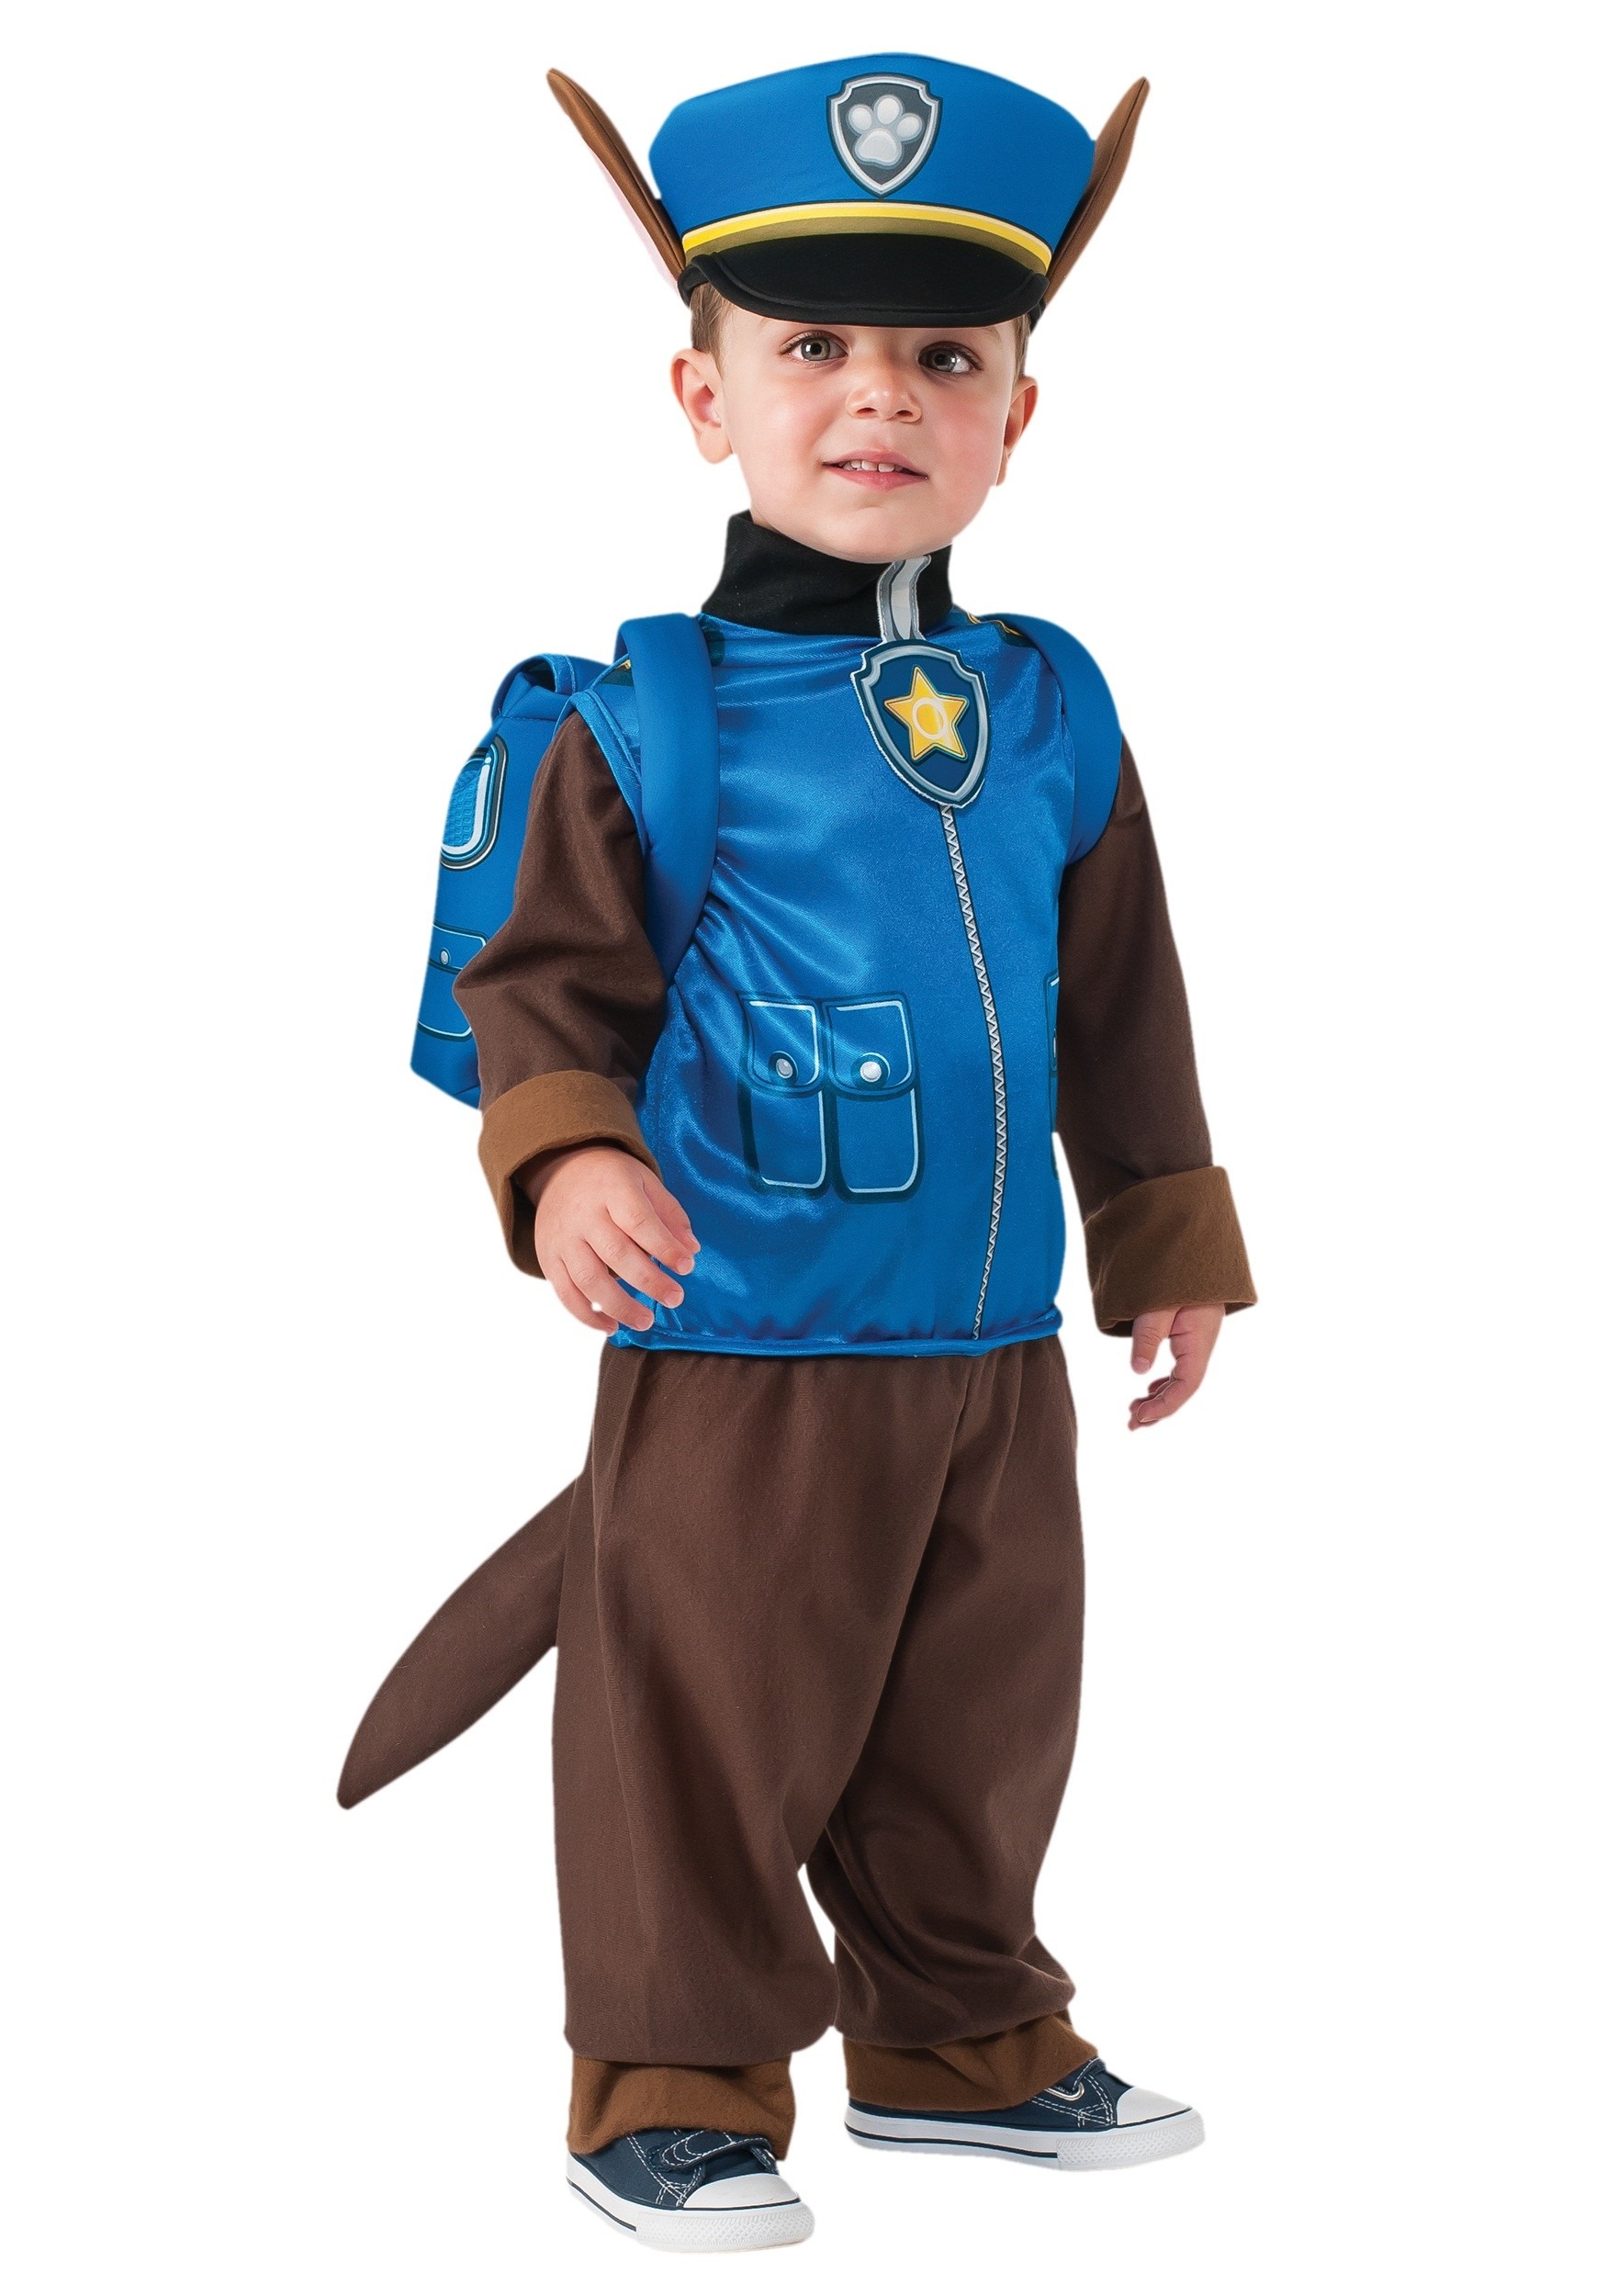 Chase Child Costume from Paw Patrol | TV Show Costume